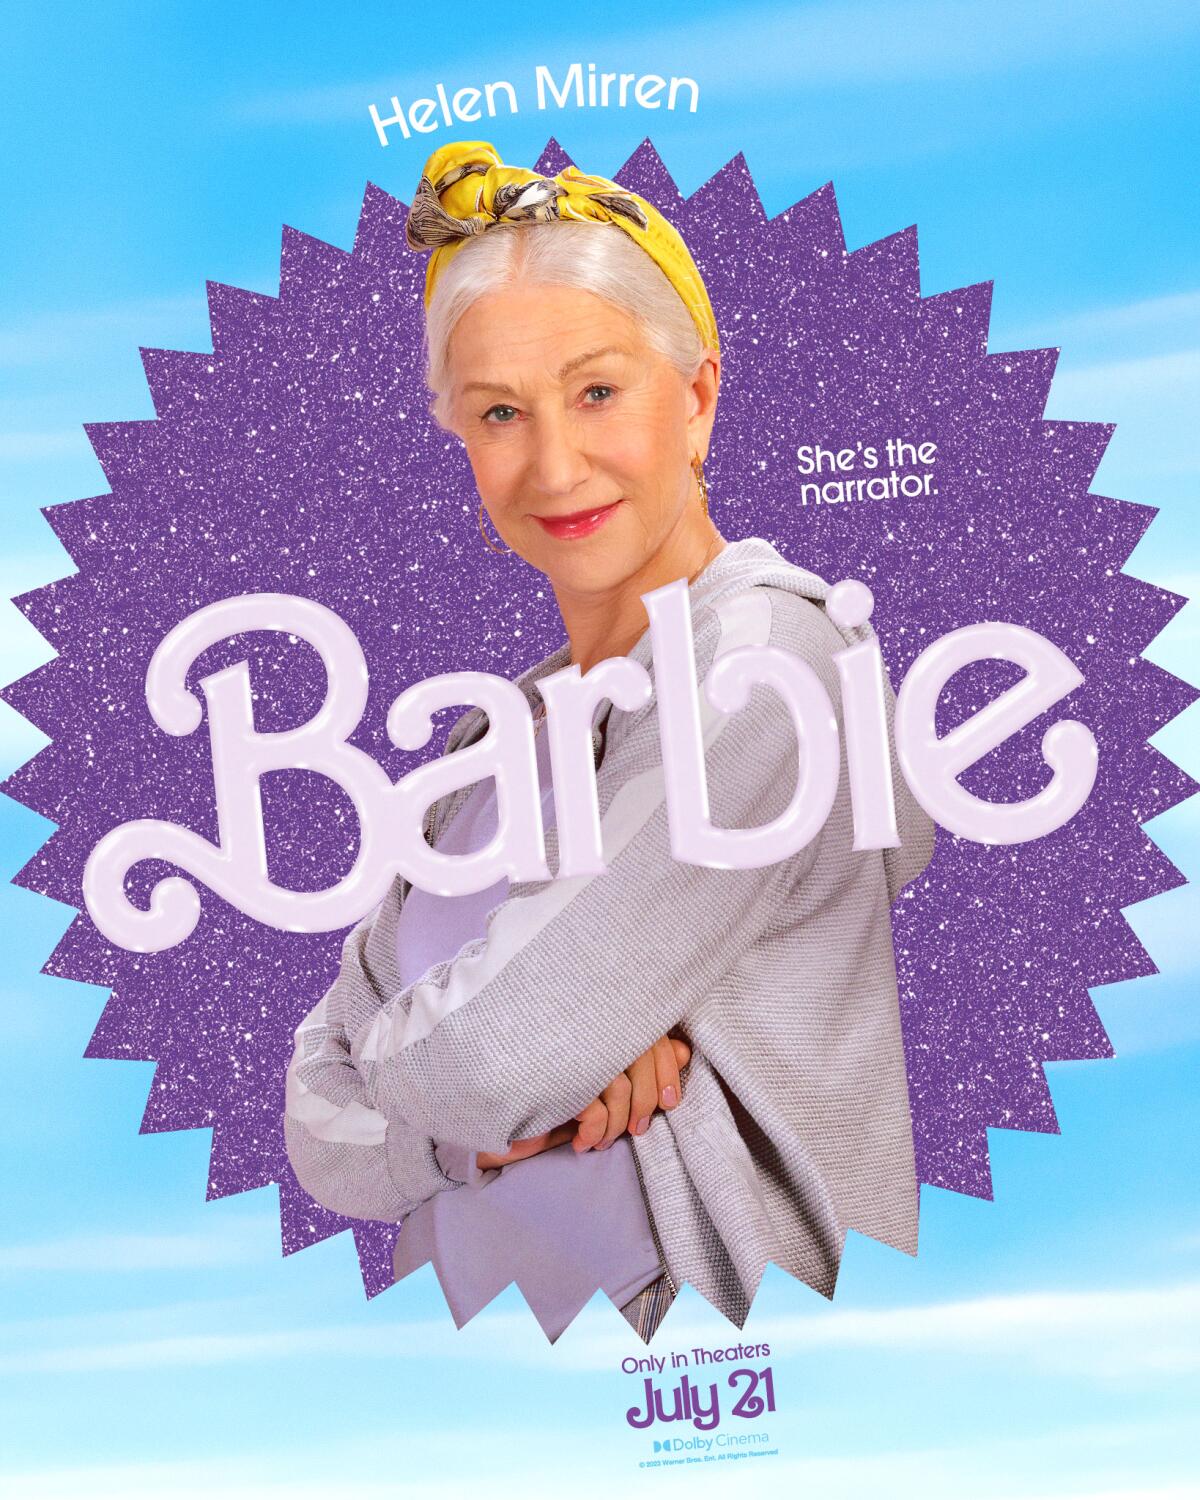 Helen Mirren poses with her arms crossed in a "Barbie" movie poster. She wears a gray hoodie and a yellow headband.